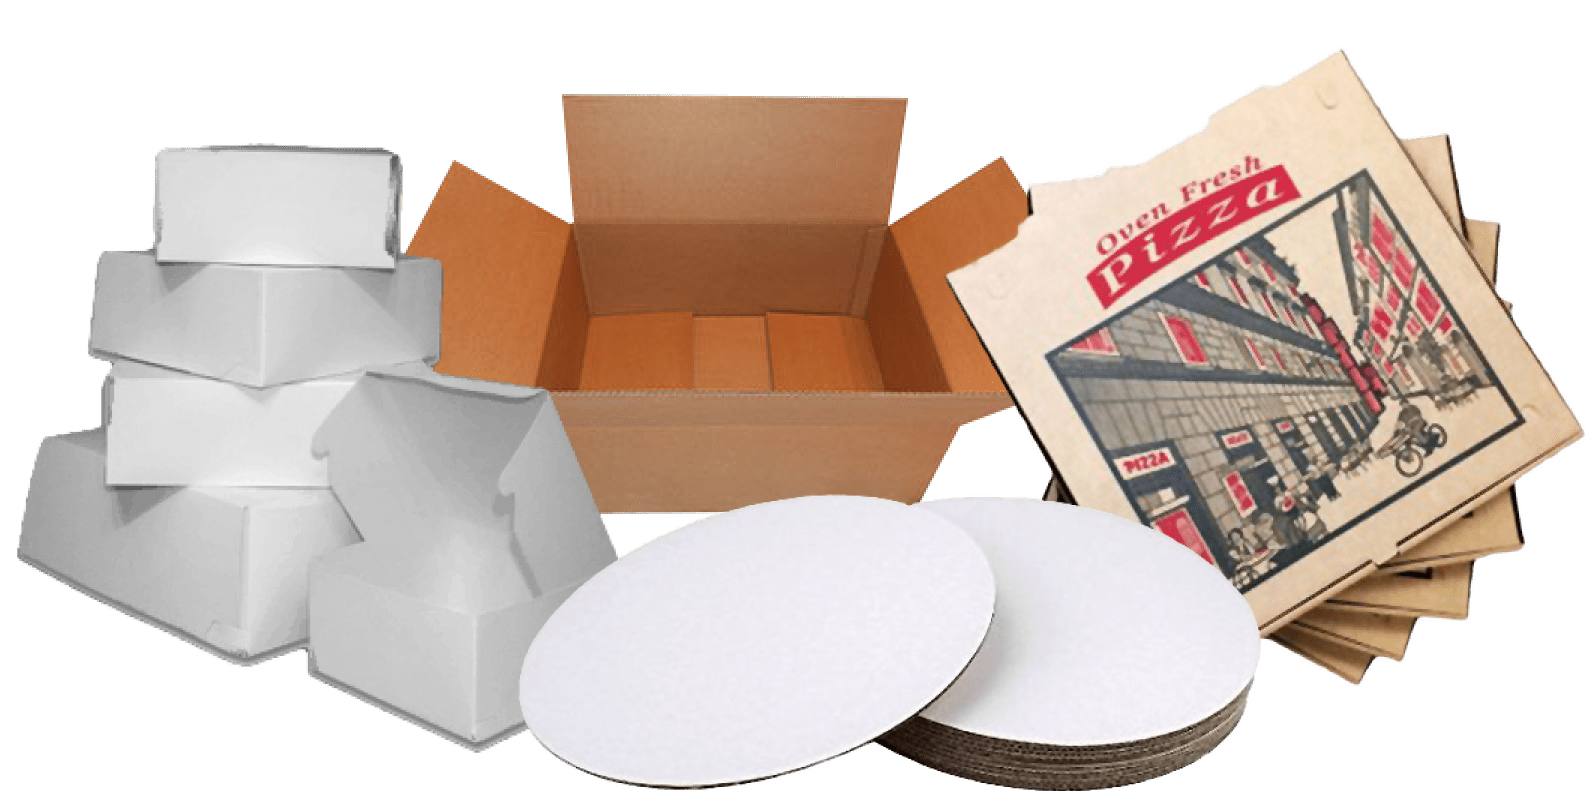 Products like pizza boxes and circles, stock boxes, and custom boxes